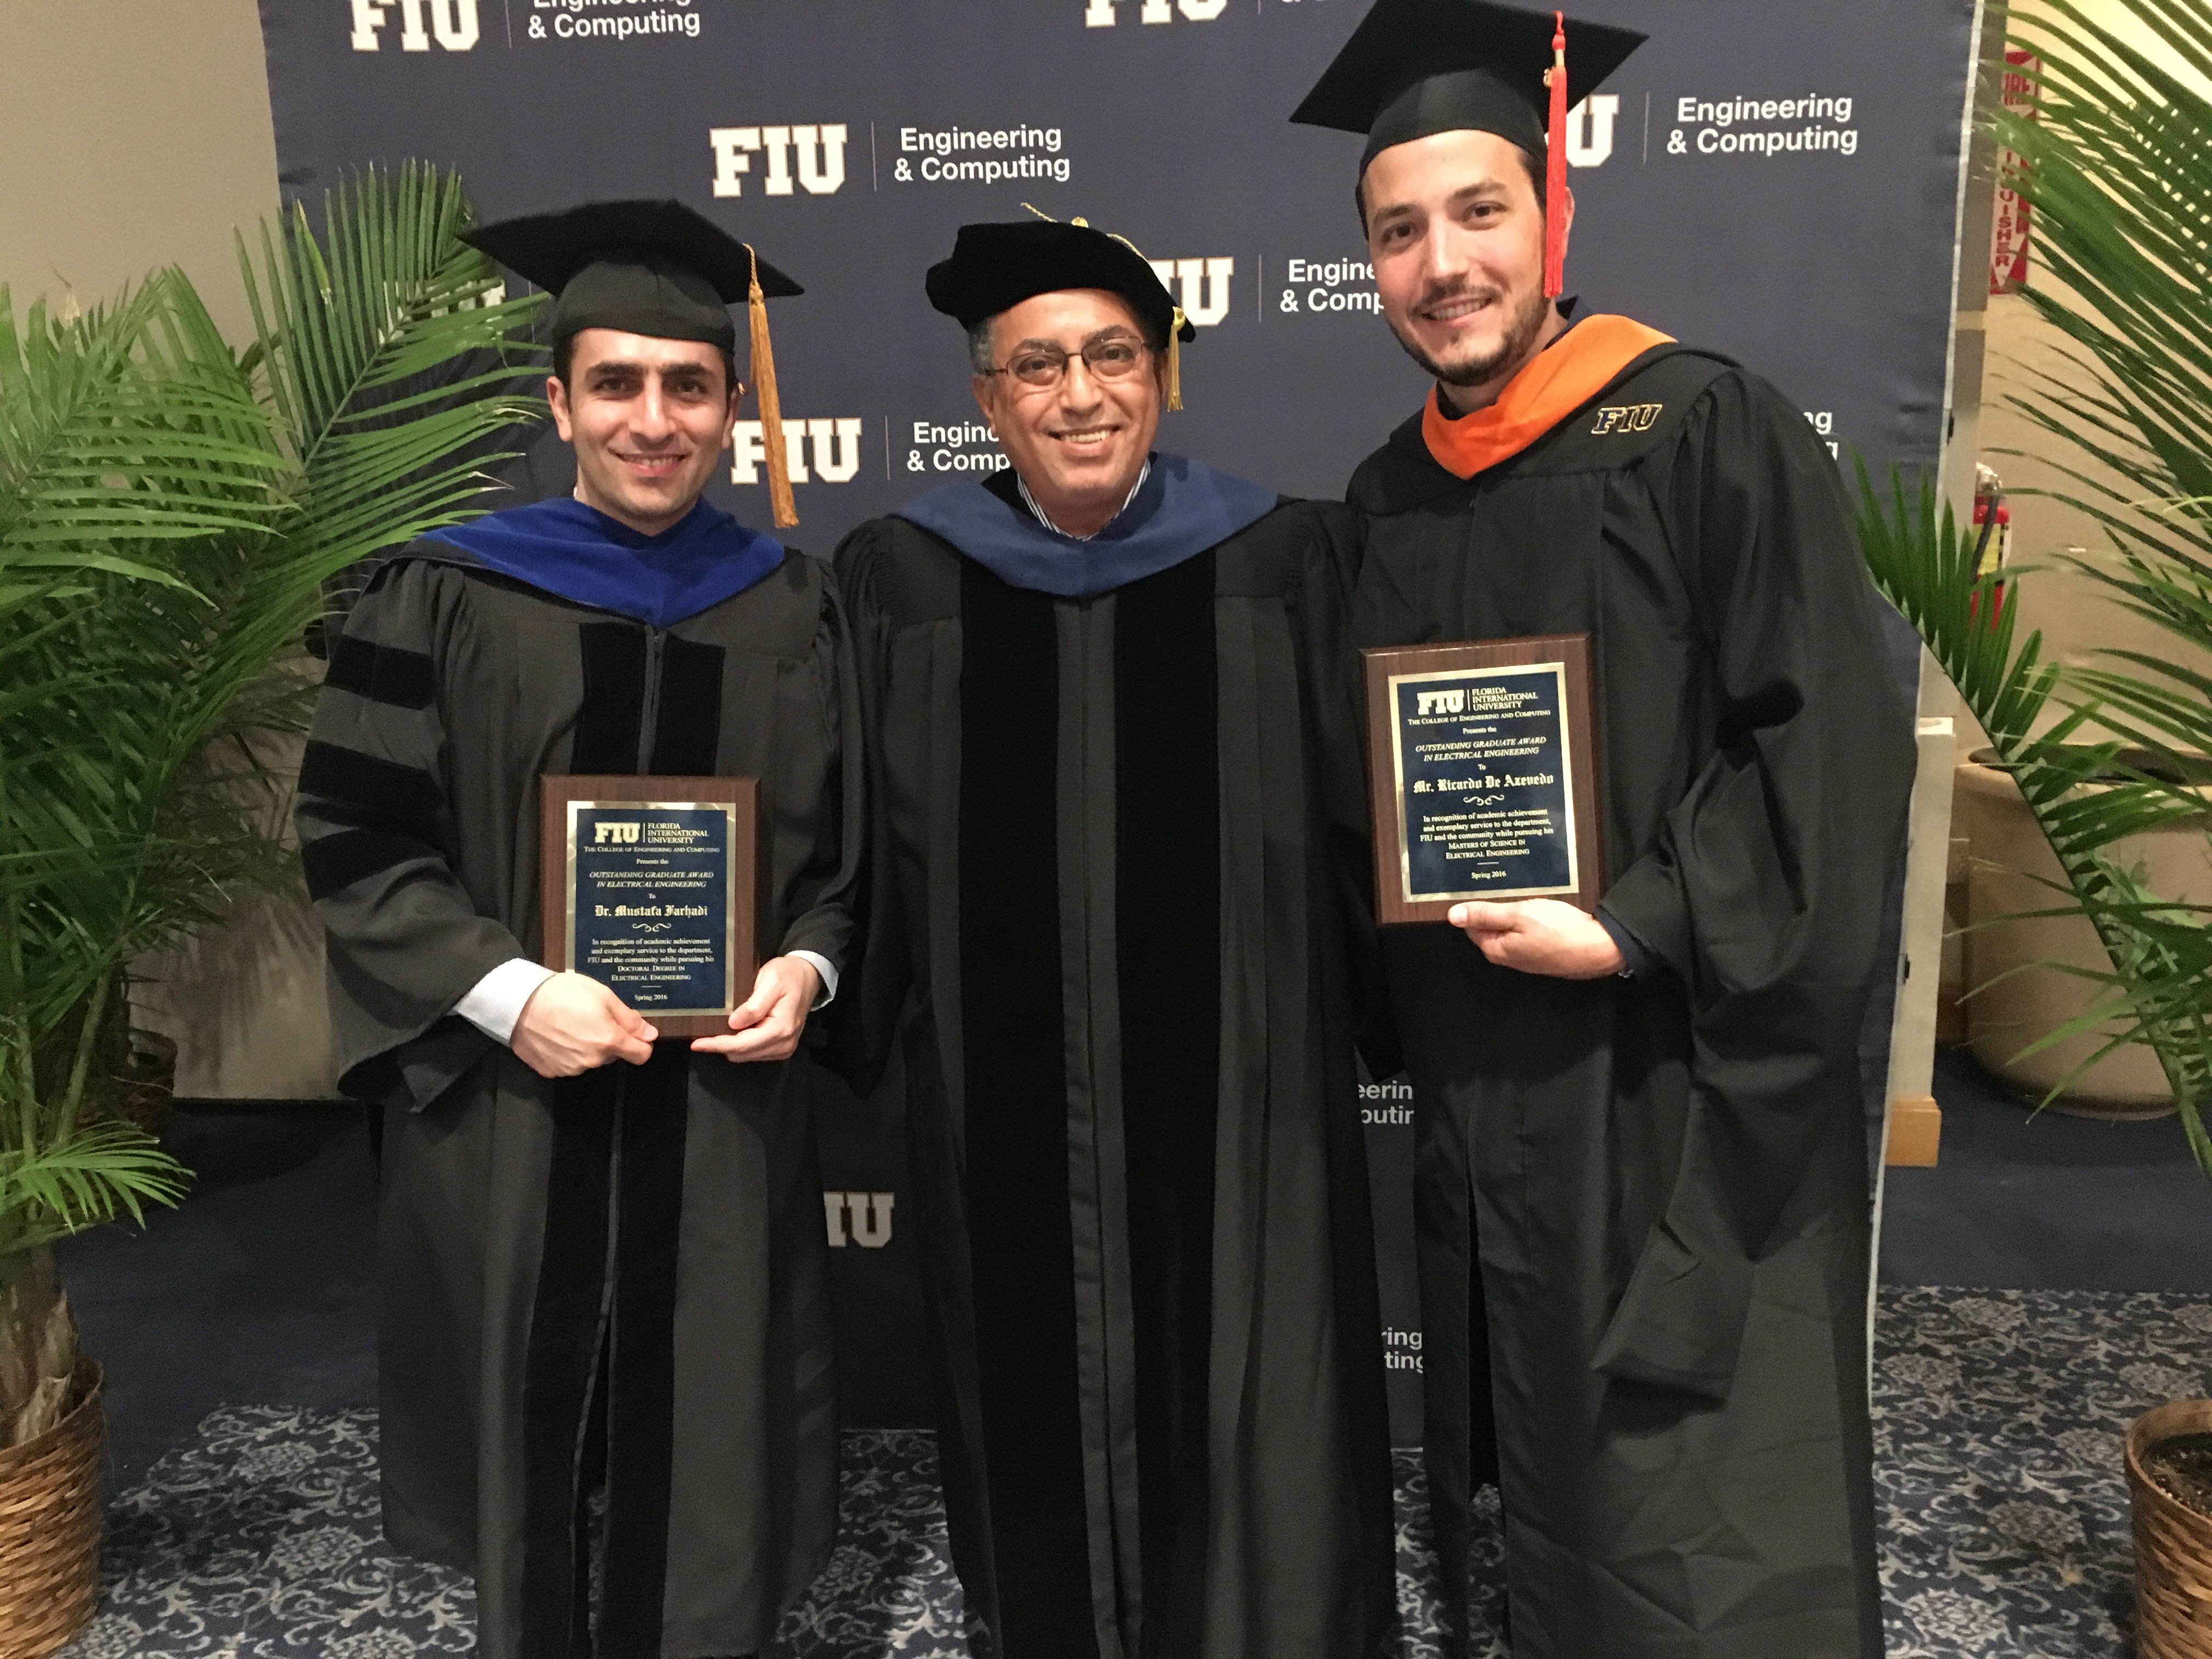 Our doctoral student Mustafa Farhadi receive the Outstanding PhD Graduate Award during the Graduation Ceremony held at FIU, Spring, 2016